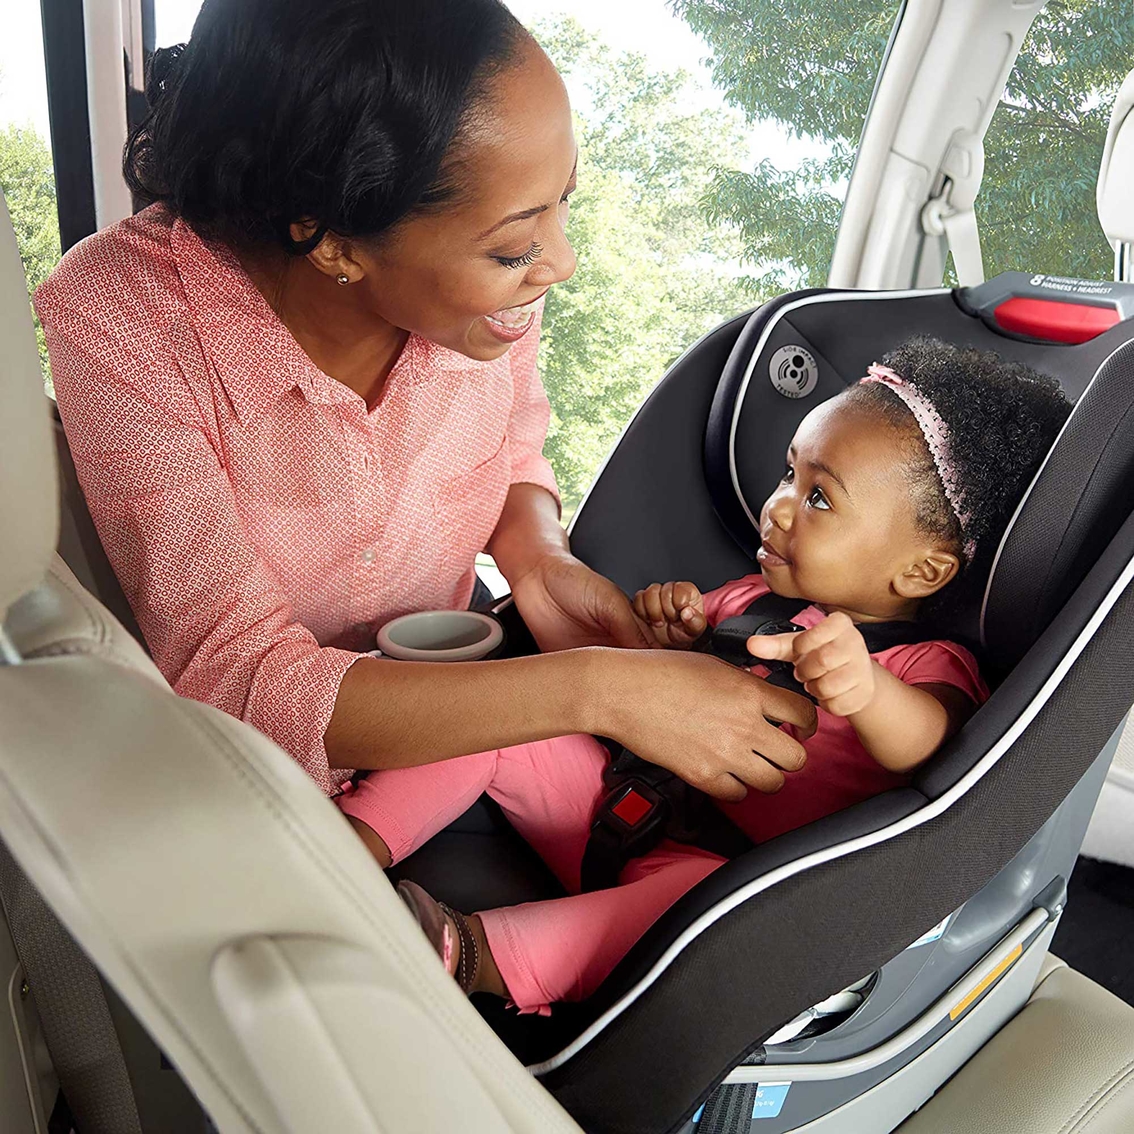 Graco Contender 65 Convertible Car Seat - Image 4 of 4